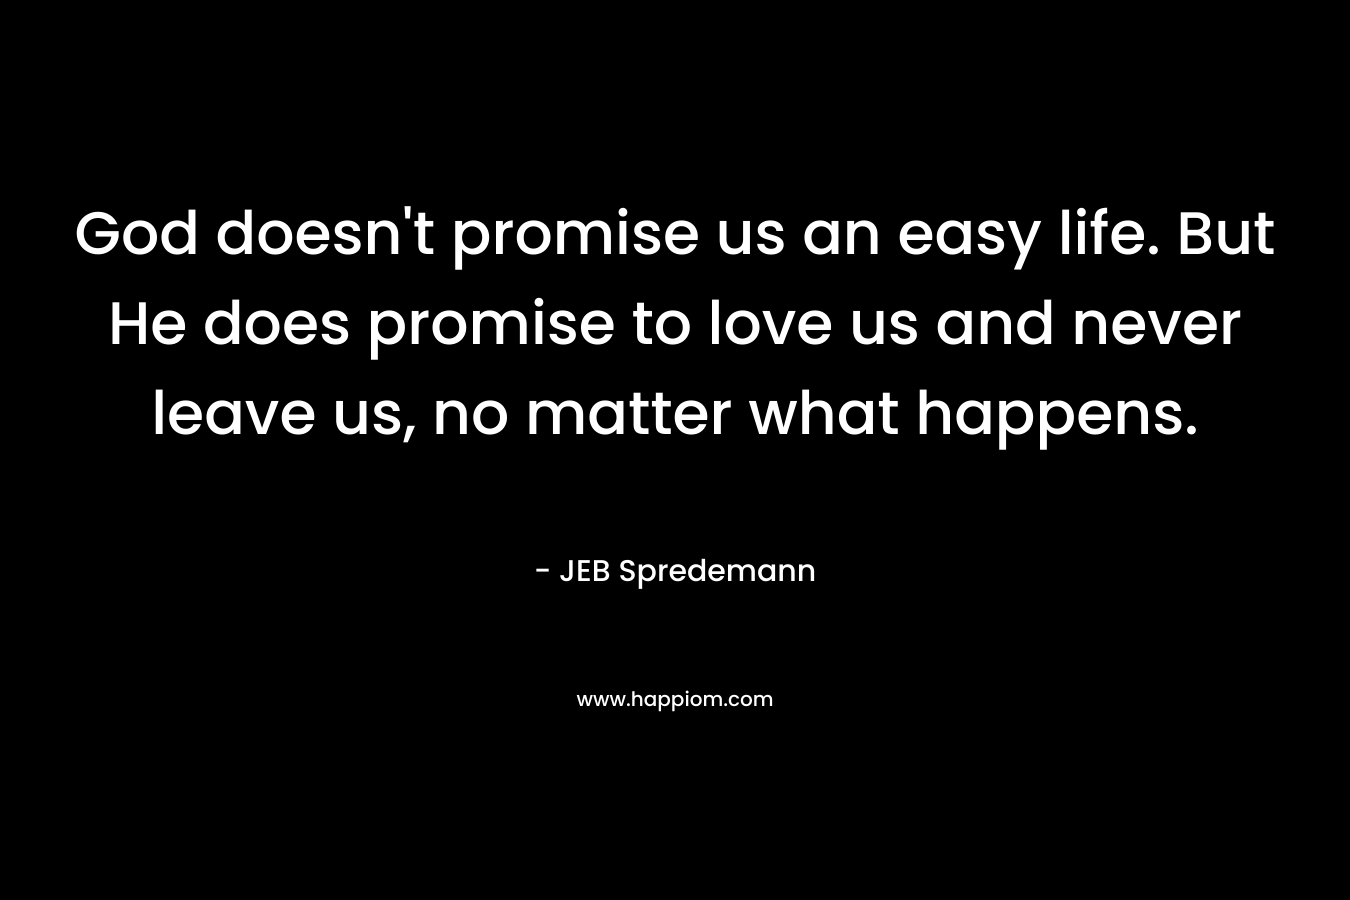 God doesn’t promise us an easy life. But He does promise to love us and never leave us, no matter what happens. – JEB Spredemann